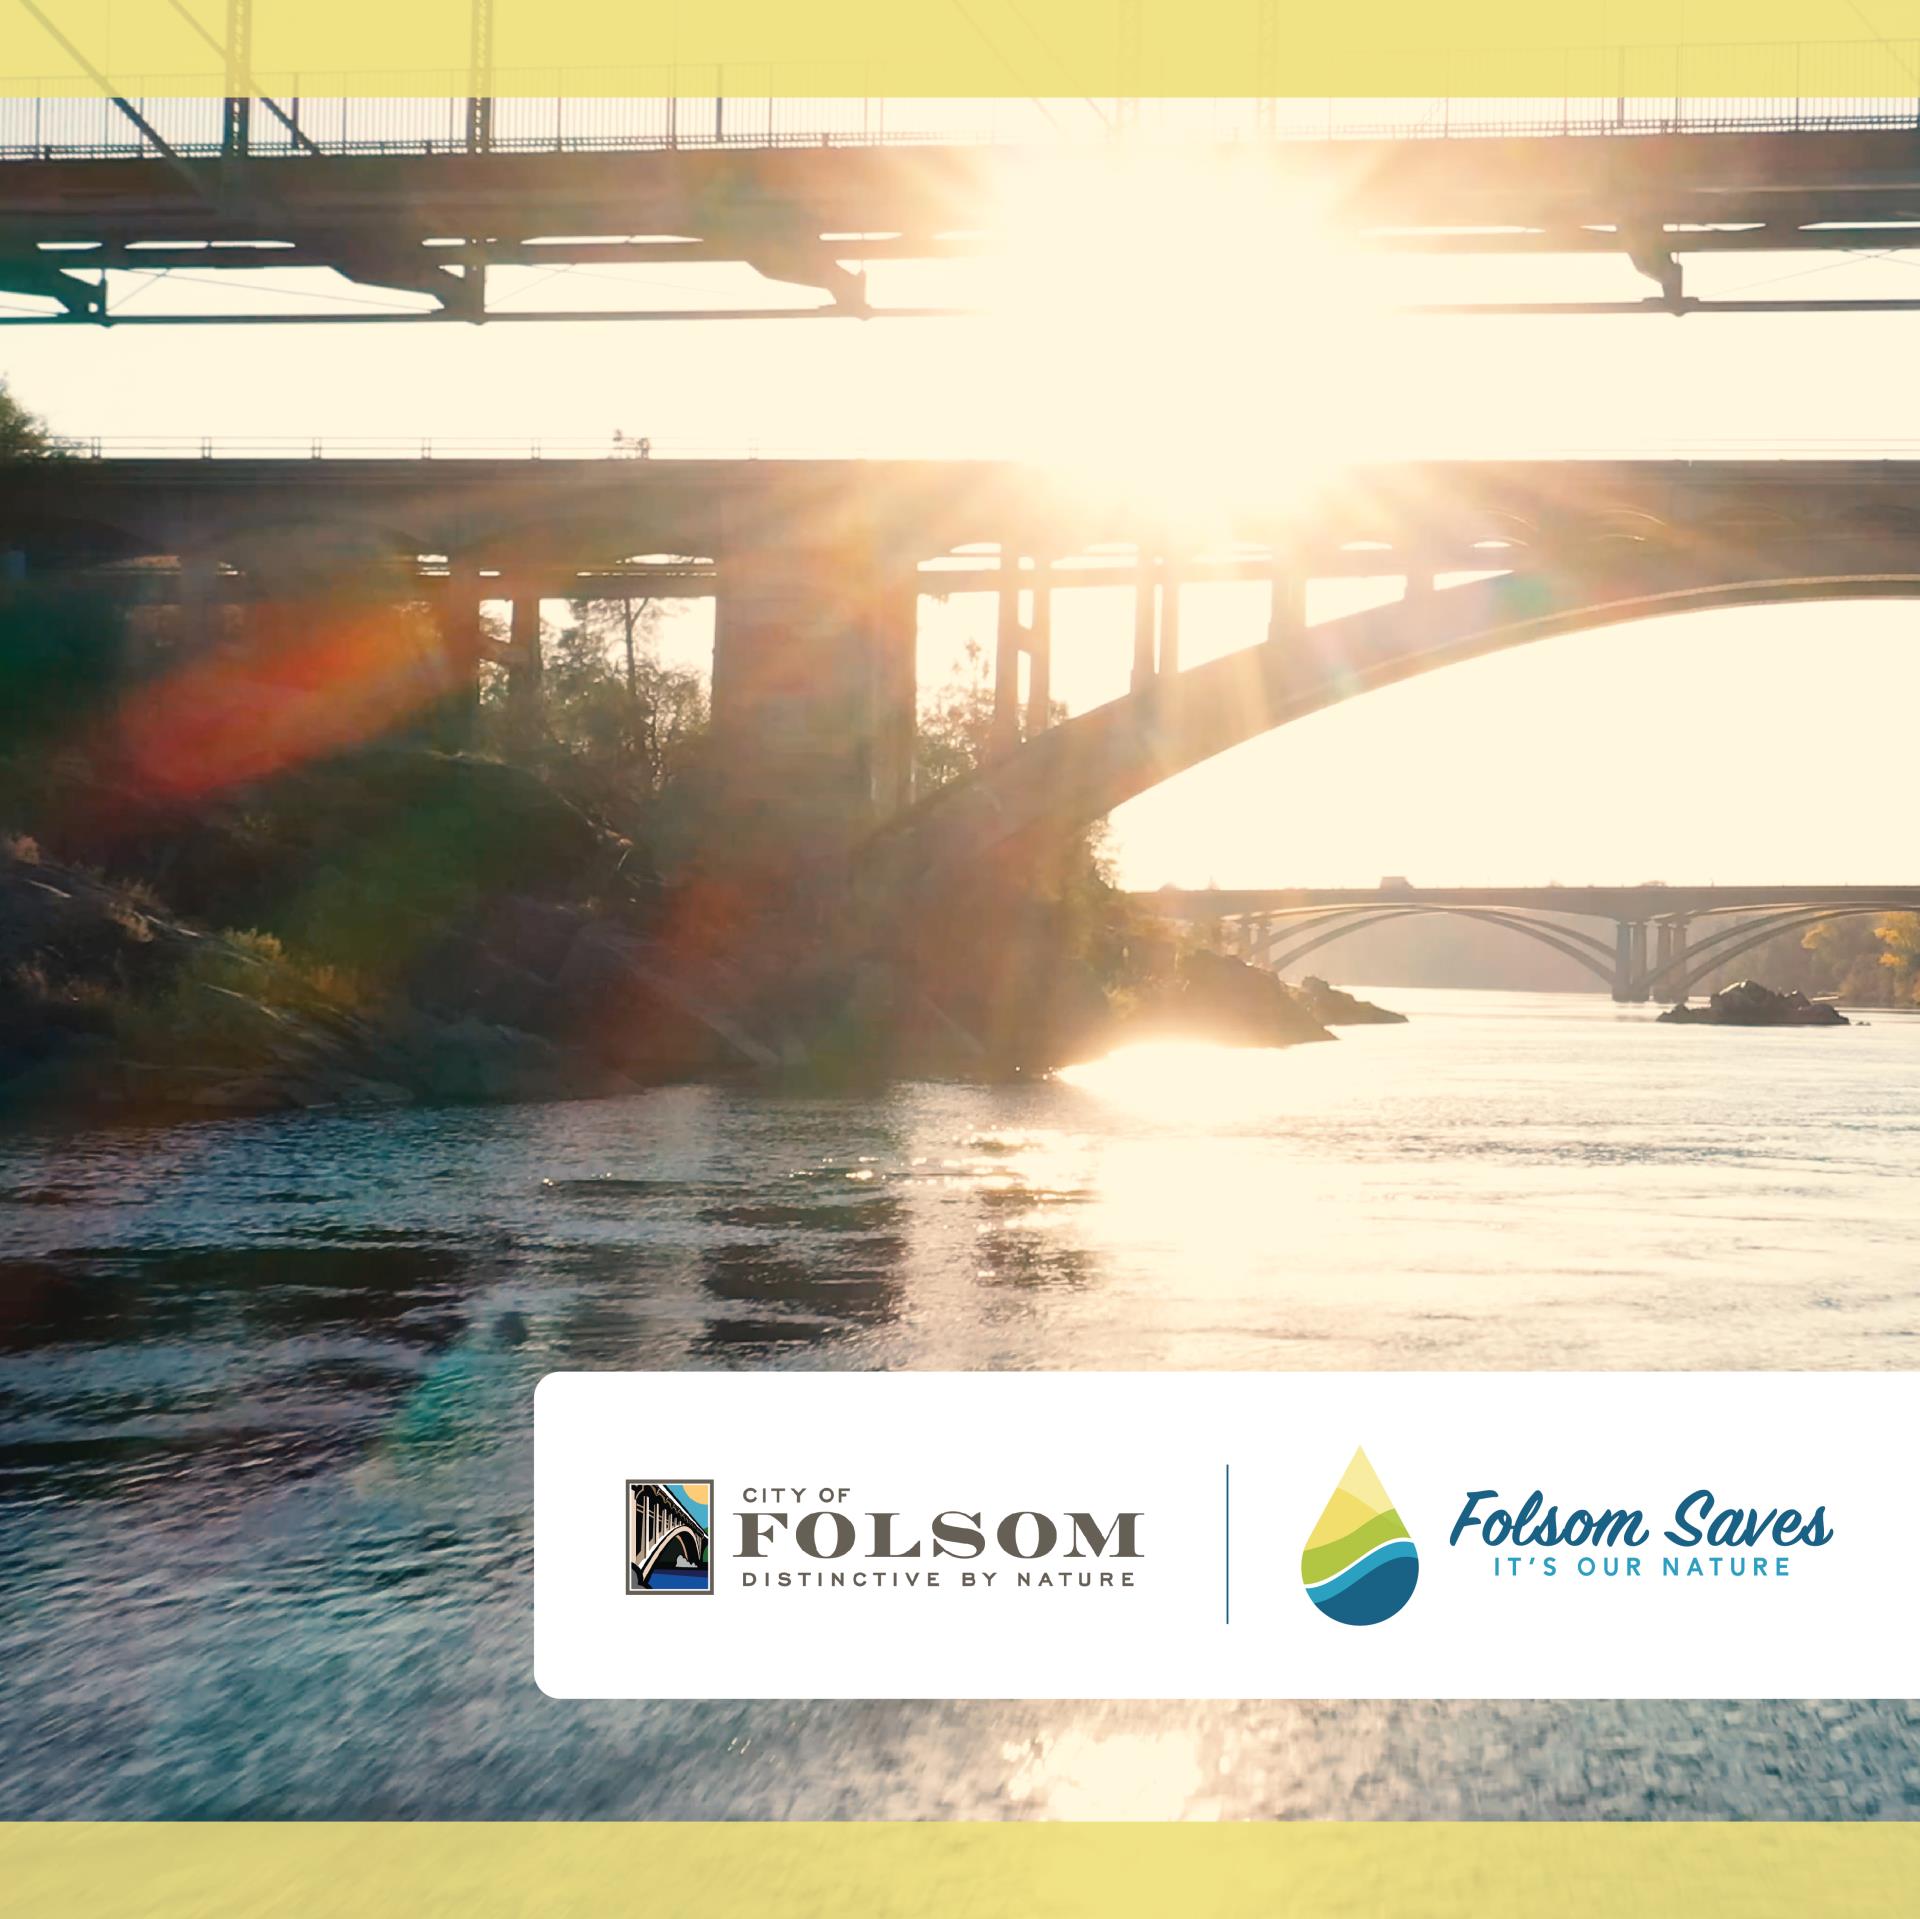 Folsom City Logo and Folsom Saves Logo with pale yellow overlay top and bottom bar with image in the background of the river with bridges and rocks